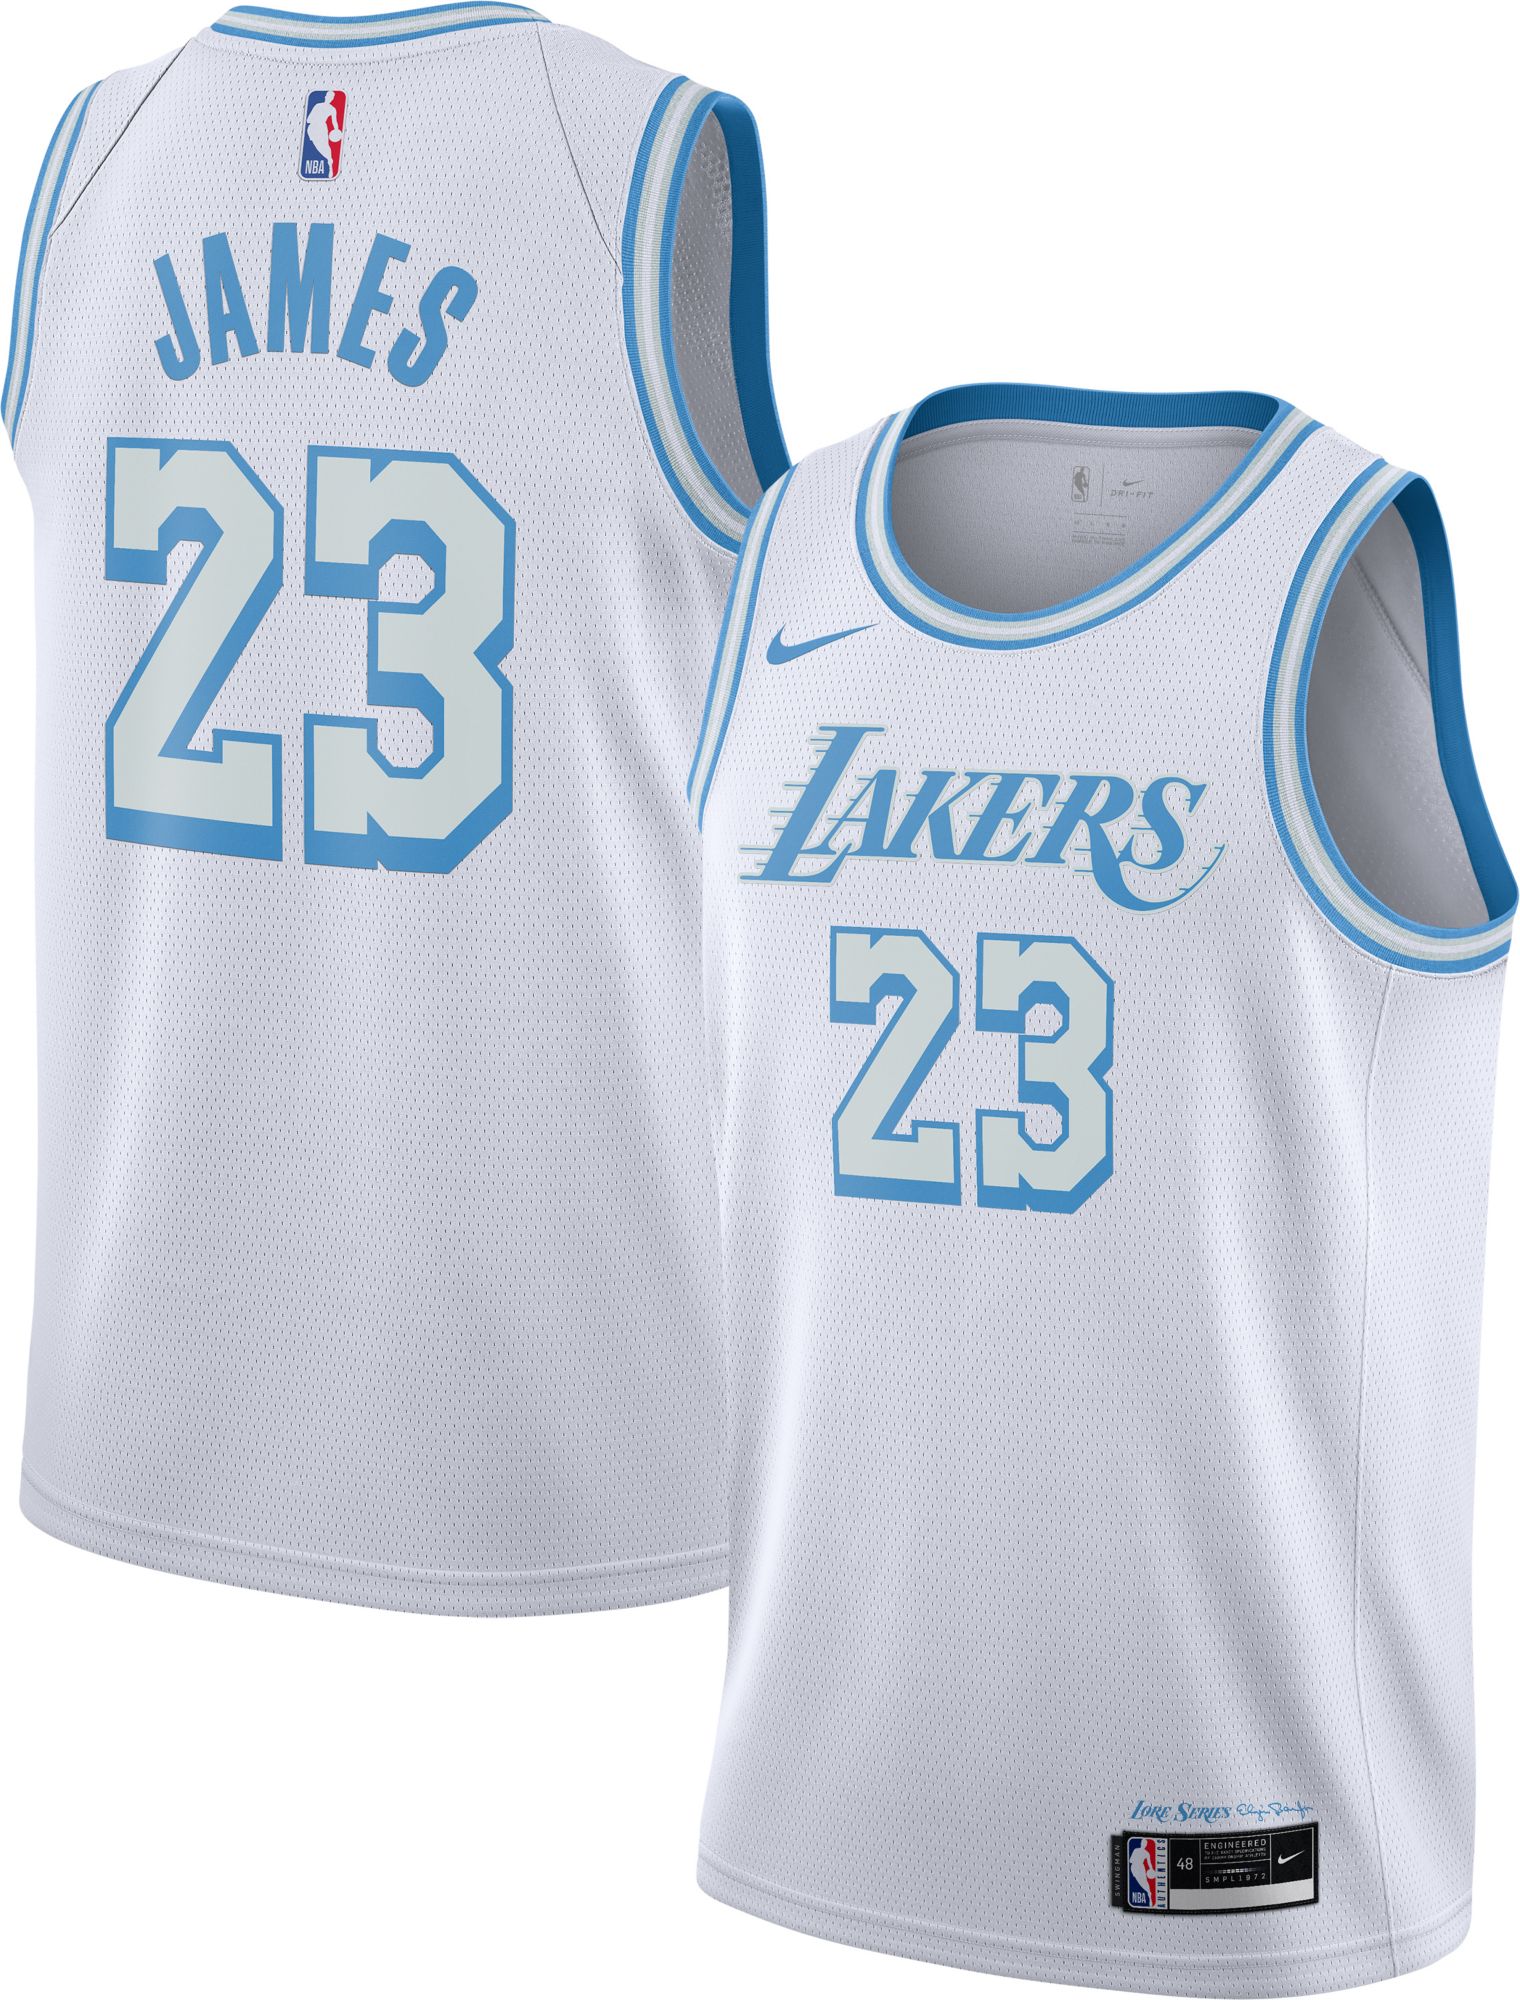 los angeles lakers jersey 2020